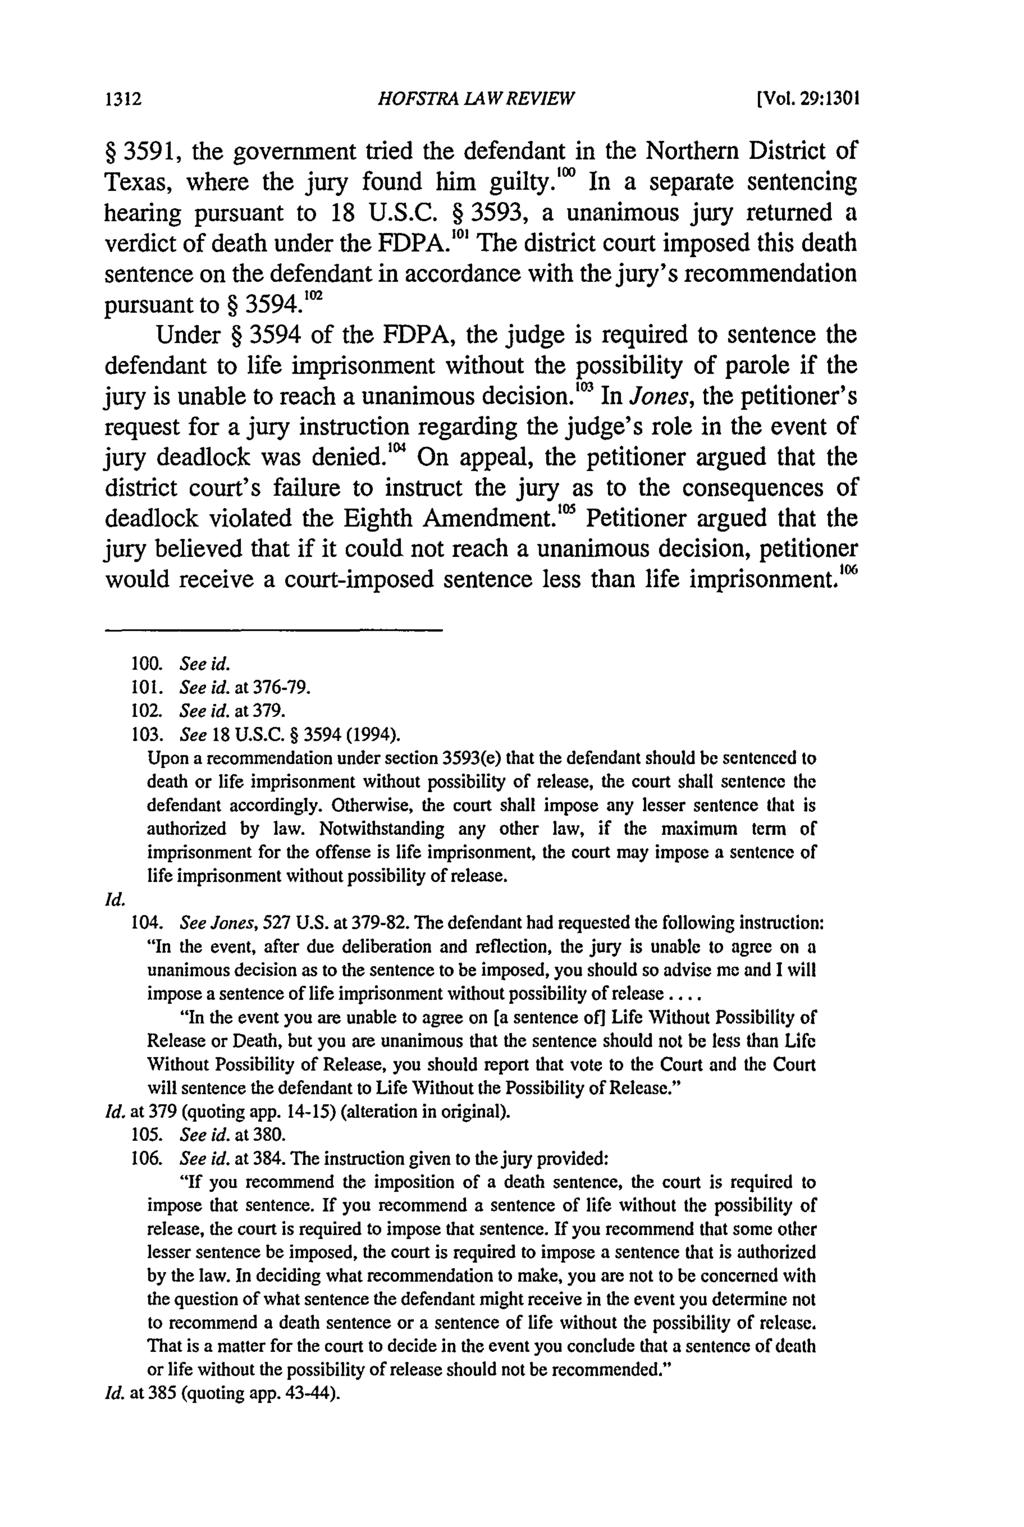 Hofstra Law Review, Vol. 29, Iss. 4 [2001], Art. 11 HOFSTRA LAW REVIEW [Vol. 29:1301 3591, the government tried the defendant in the Northern District of Texas, where the jury found him guilty.